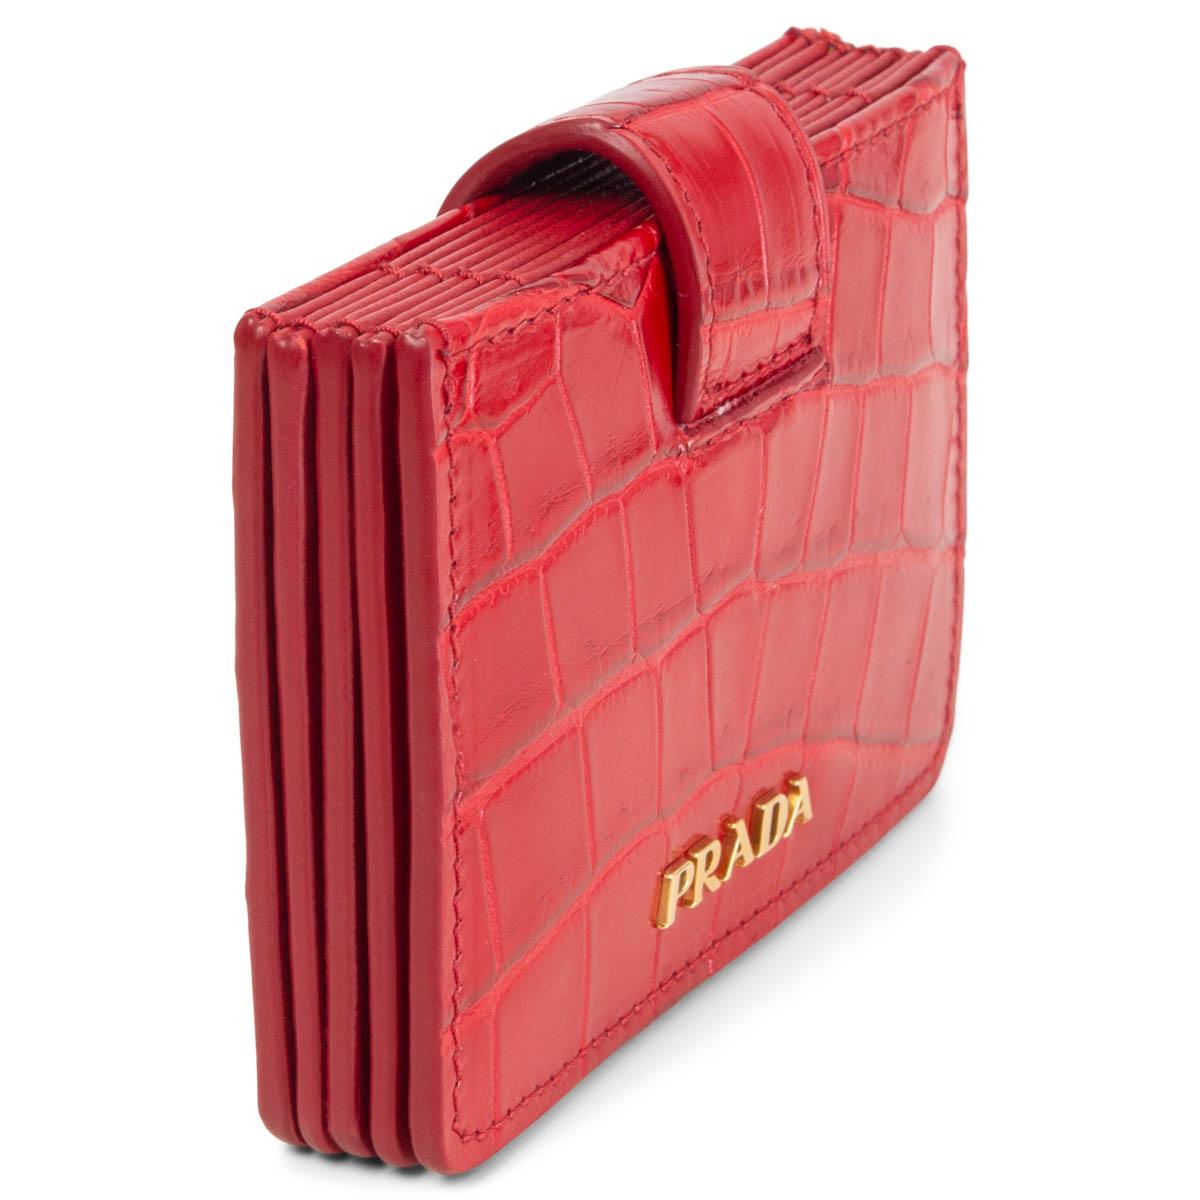 100% authentic Prada Accordion credit card wallet in red crocodile leather featuring gold-tone logo hardware and with 5 credit card slots, but they fit more than just one card. Has been carried and is in excellent condition.